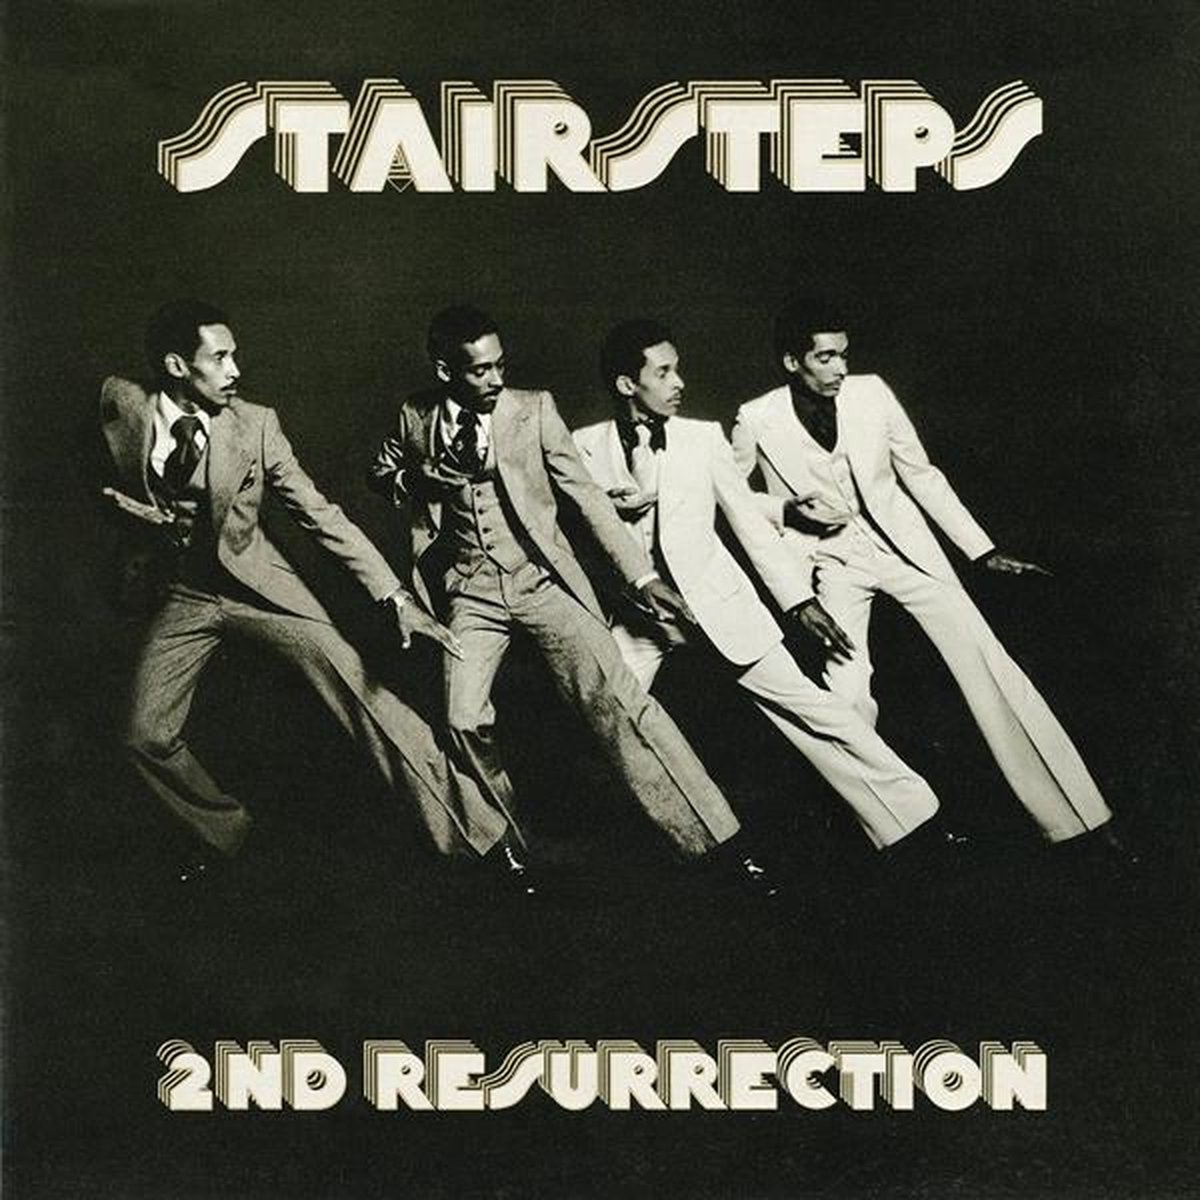 Five Stairsteps - 2nd Resurrection (LP)